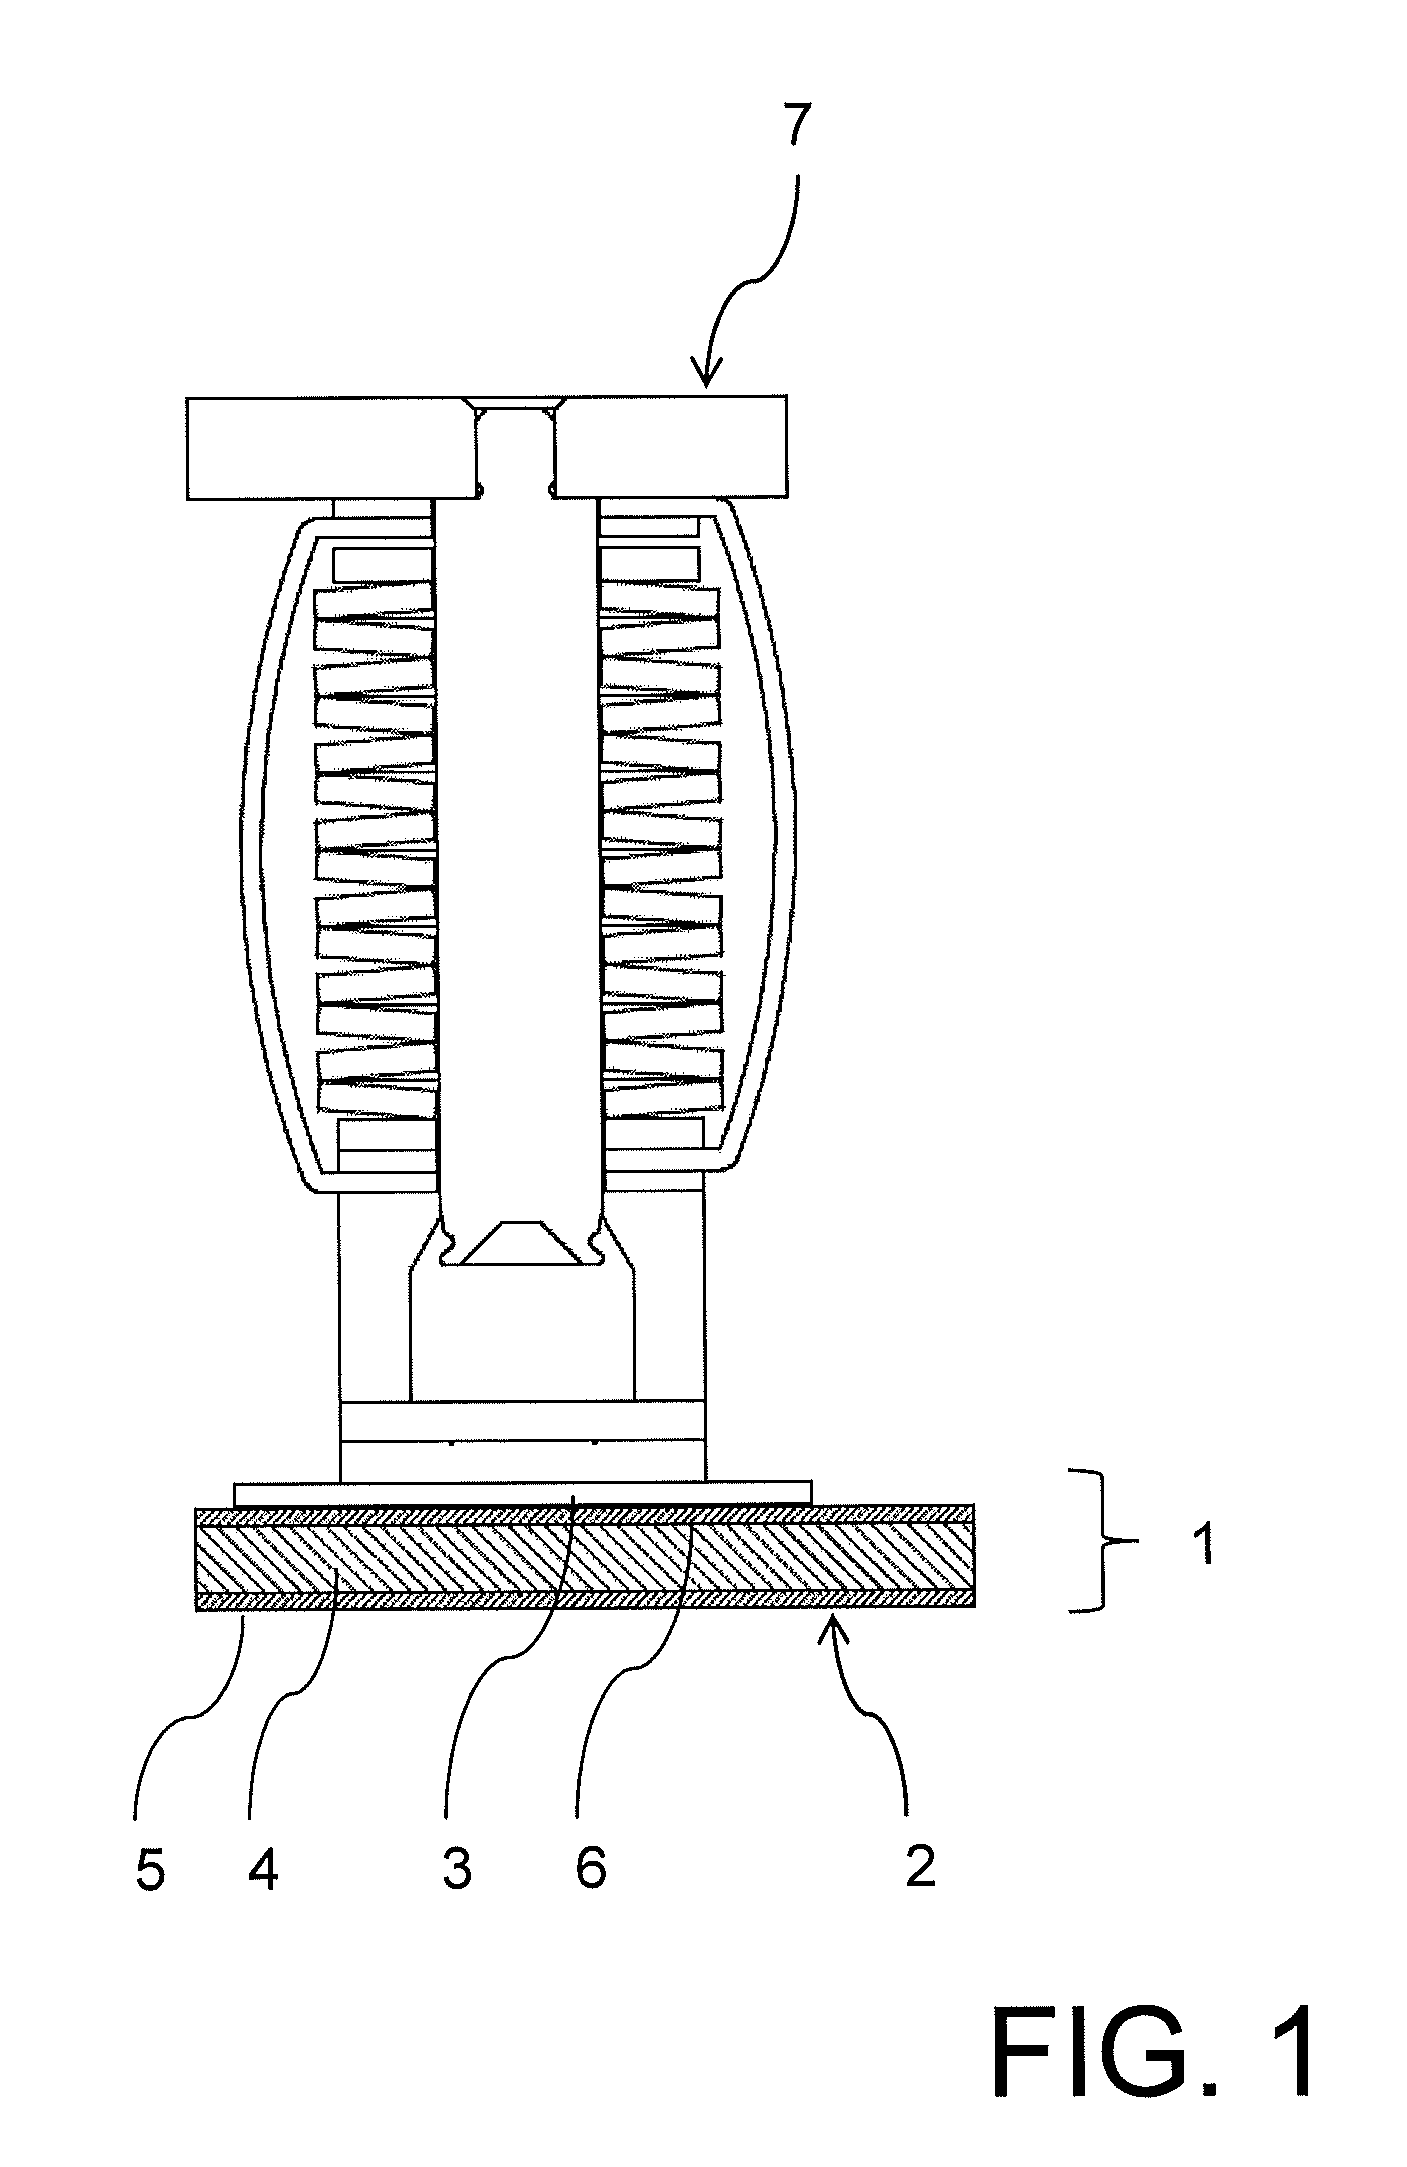 Power semiconductor arrangement, power semiconductor module with multiple power semiconductor arrangements, and module assembly comprising multiple power semiconductor modules